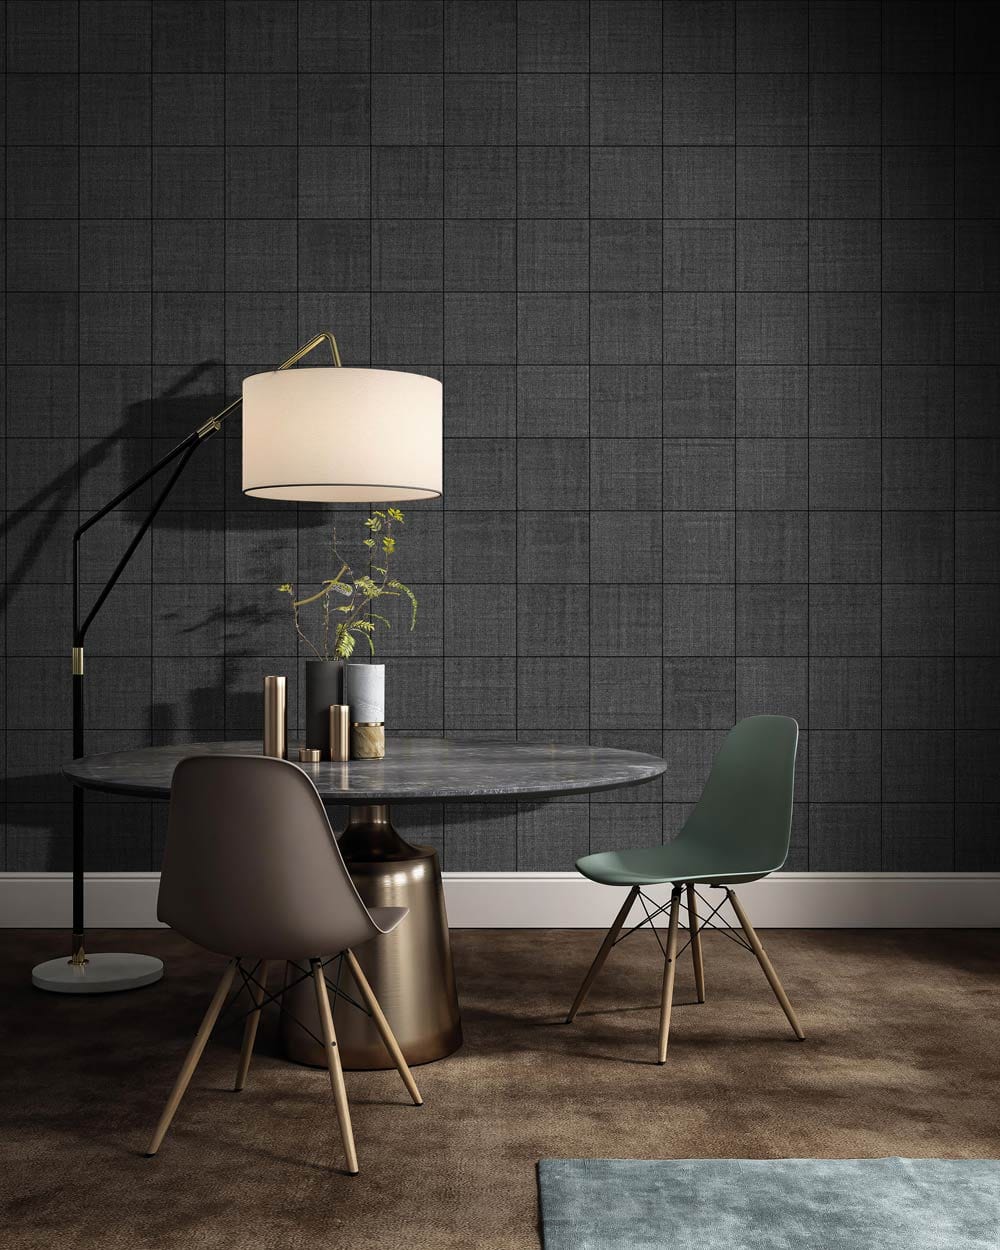 wallpaper with a square brick pattern in the living room